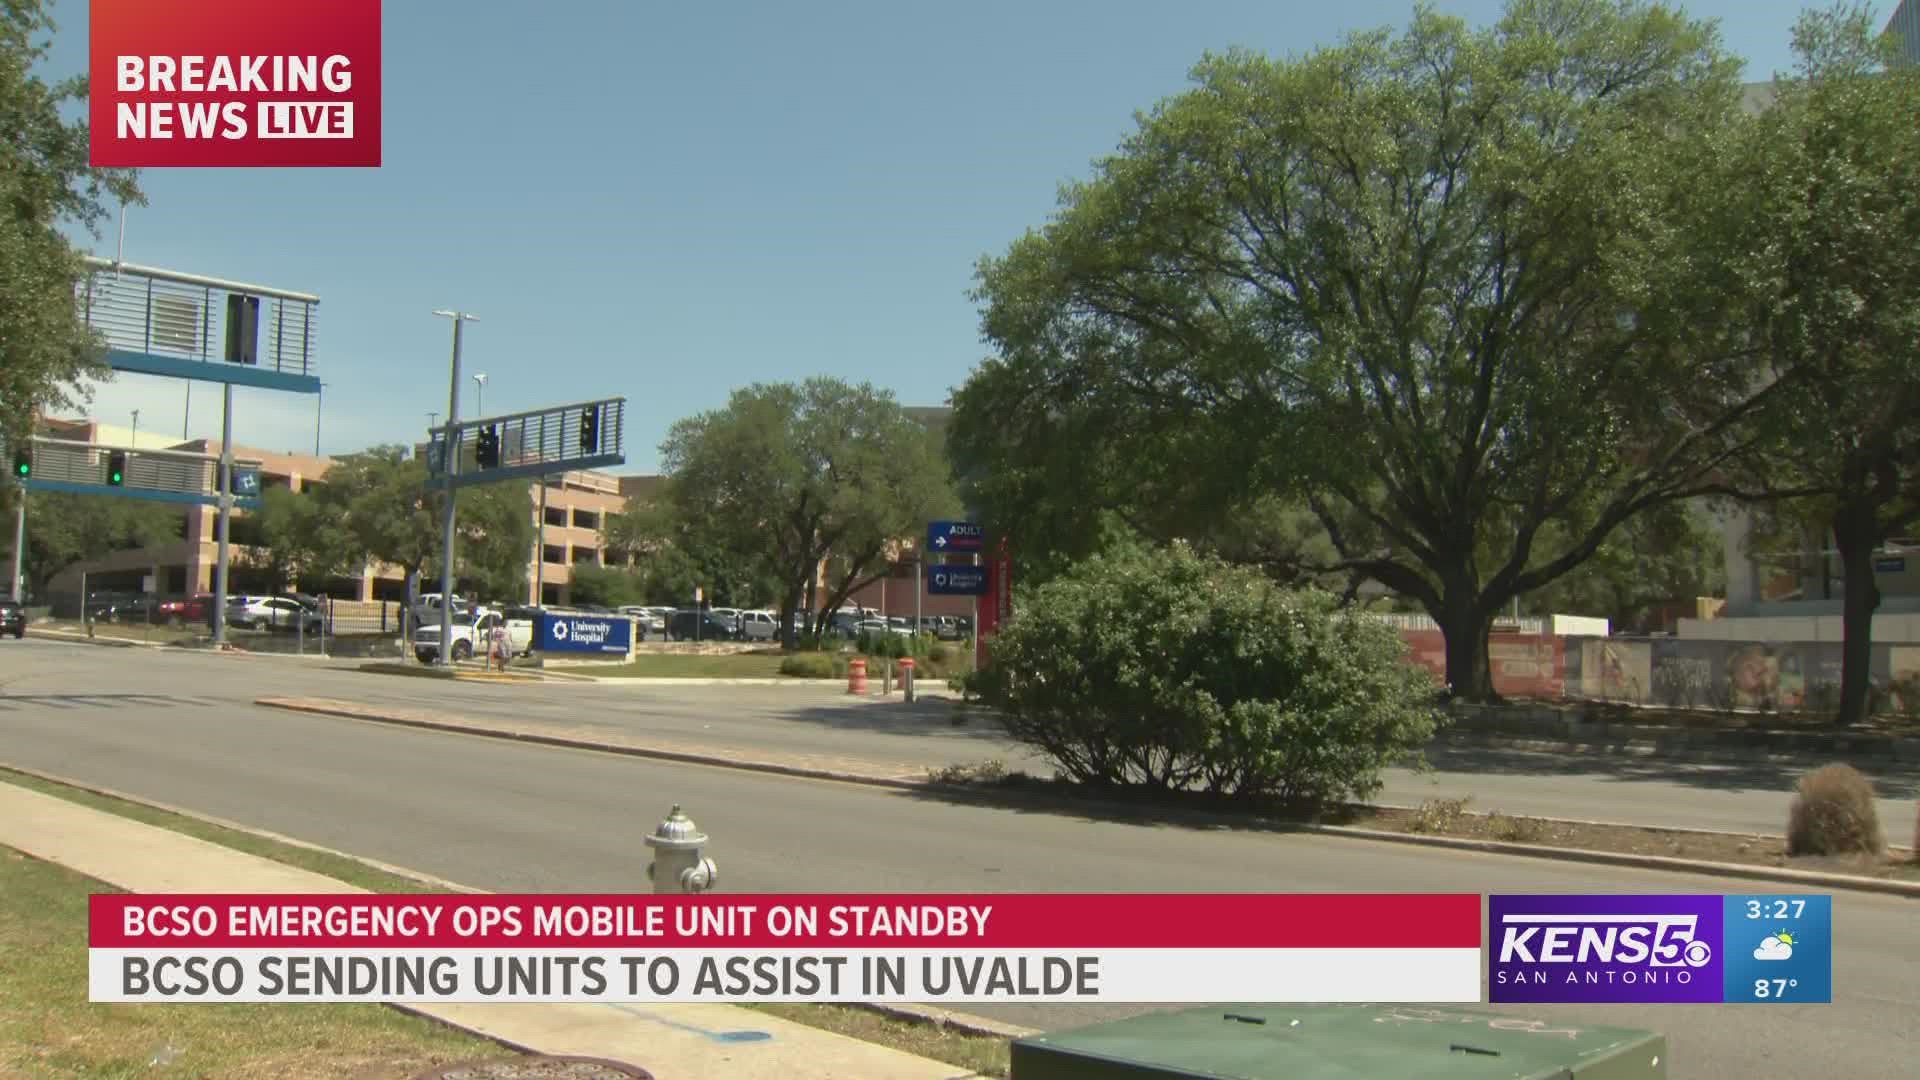 One woman and one child were transported to University Hospital after a shooting at Uvalde elementary school.